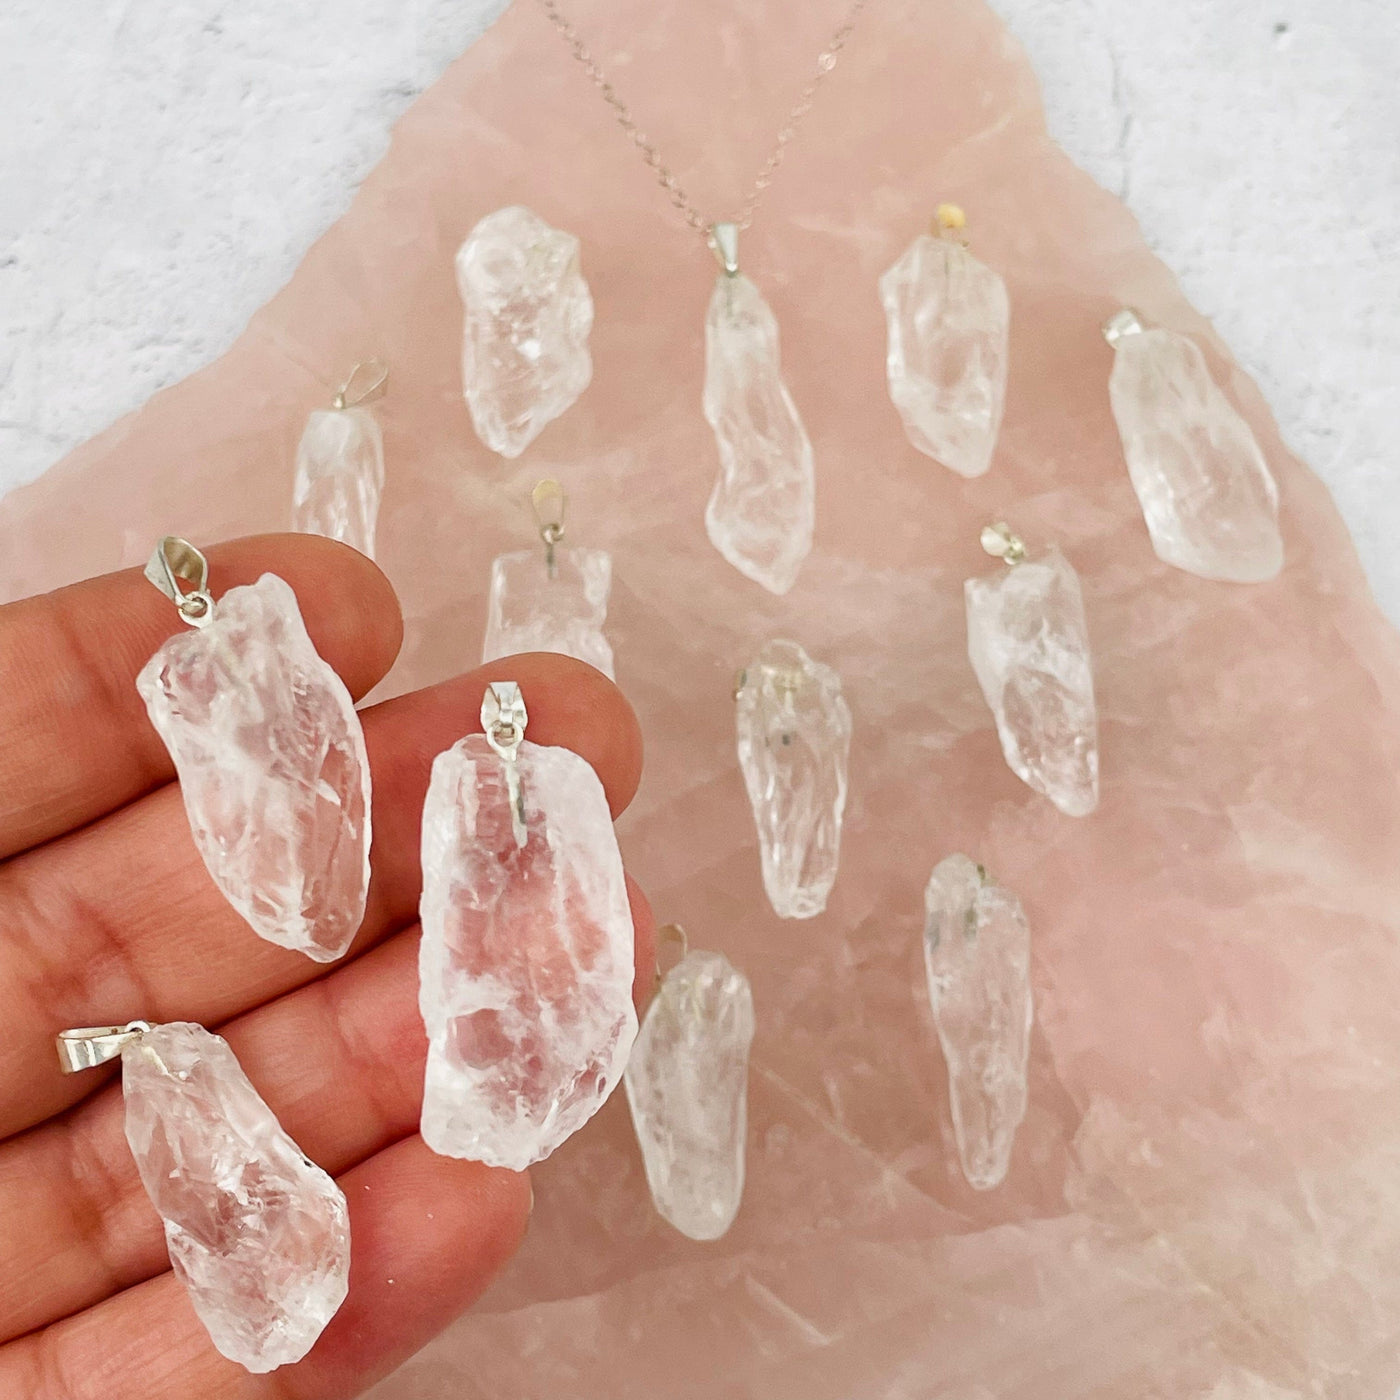 Crystal Quartz - Rough Stone Pendants with Silver Plated Bail in hand for size reference 